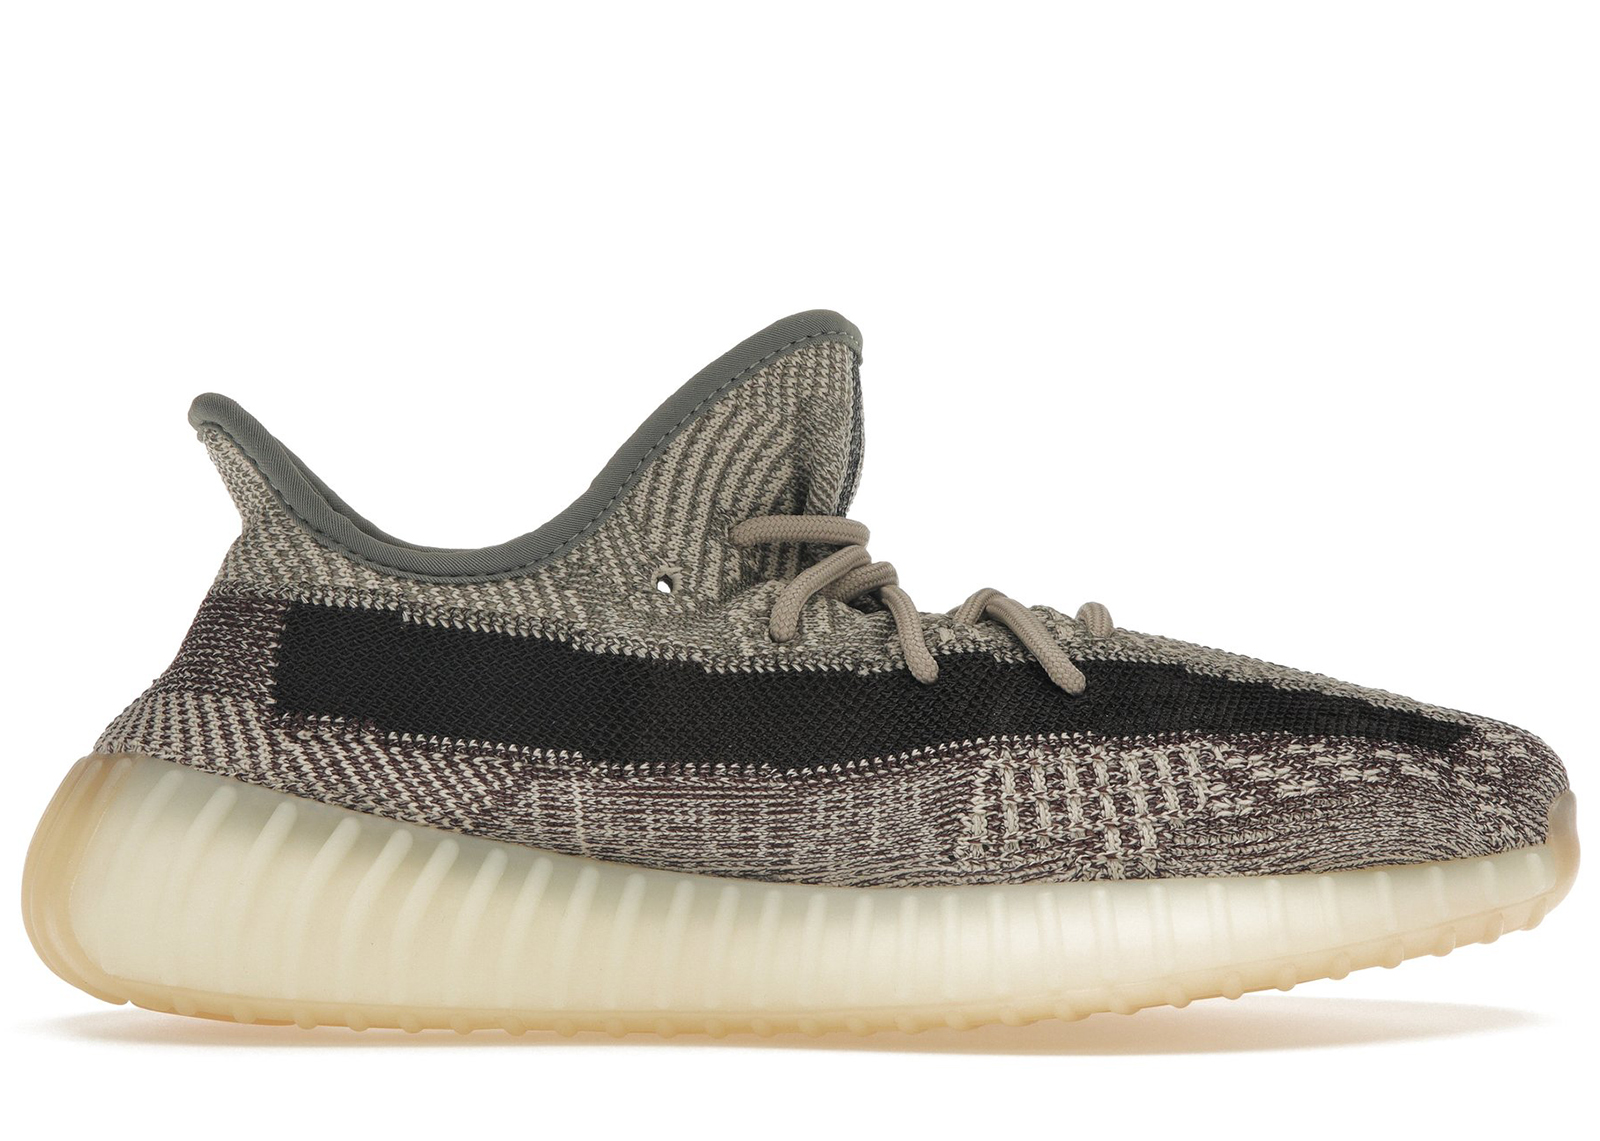 The Buyer's Guide: Yeezy Boost 350 V2 - StockX News